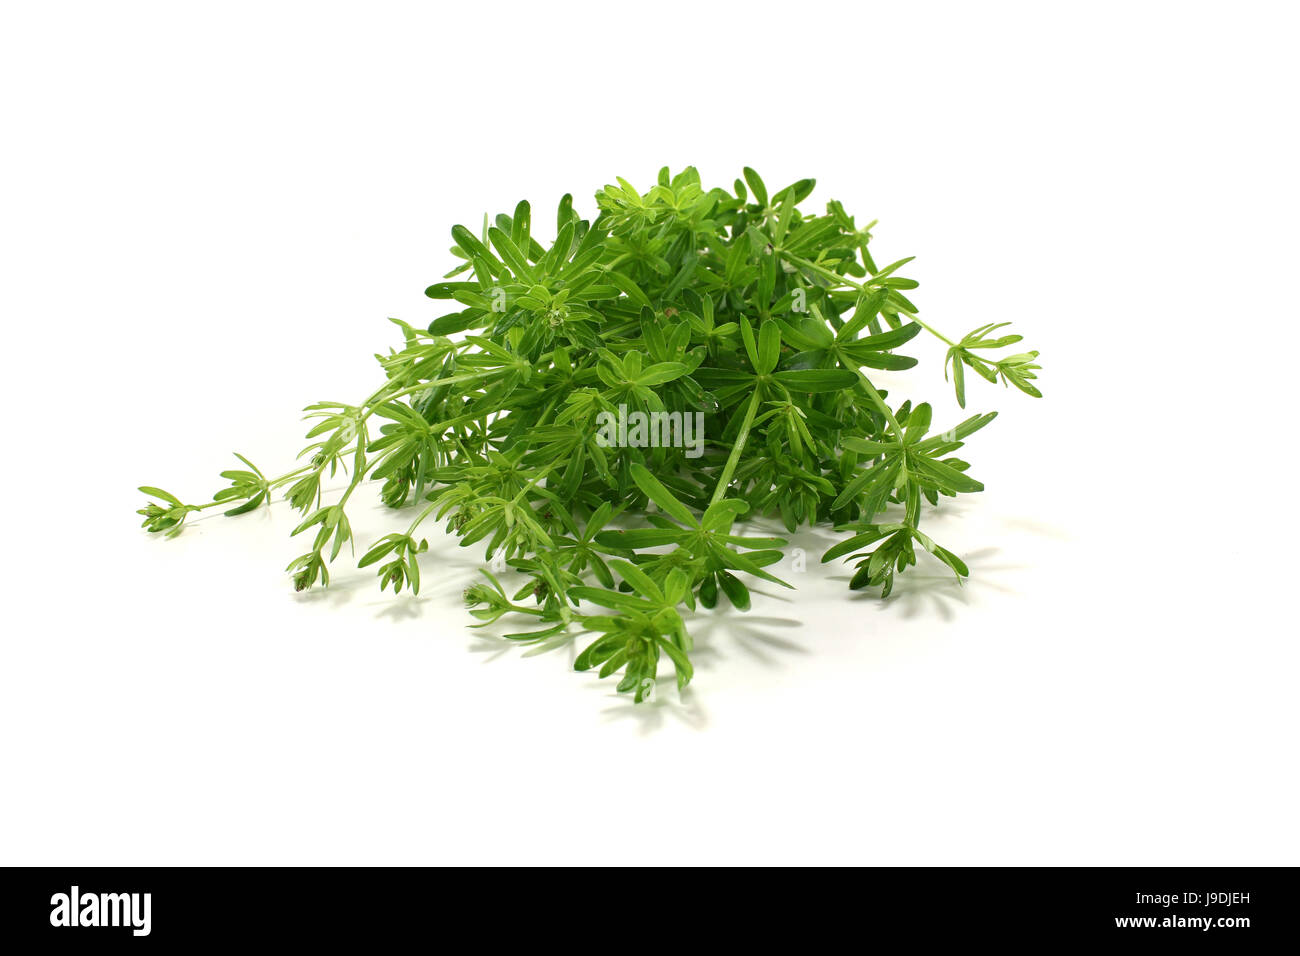 homeopathy, homeopathic, bedstraws, green, agriculture, farming, homeopathy, Stock Photo